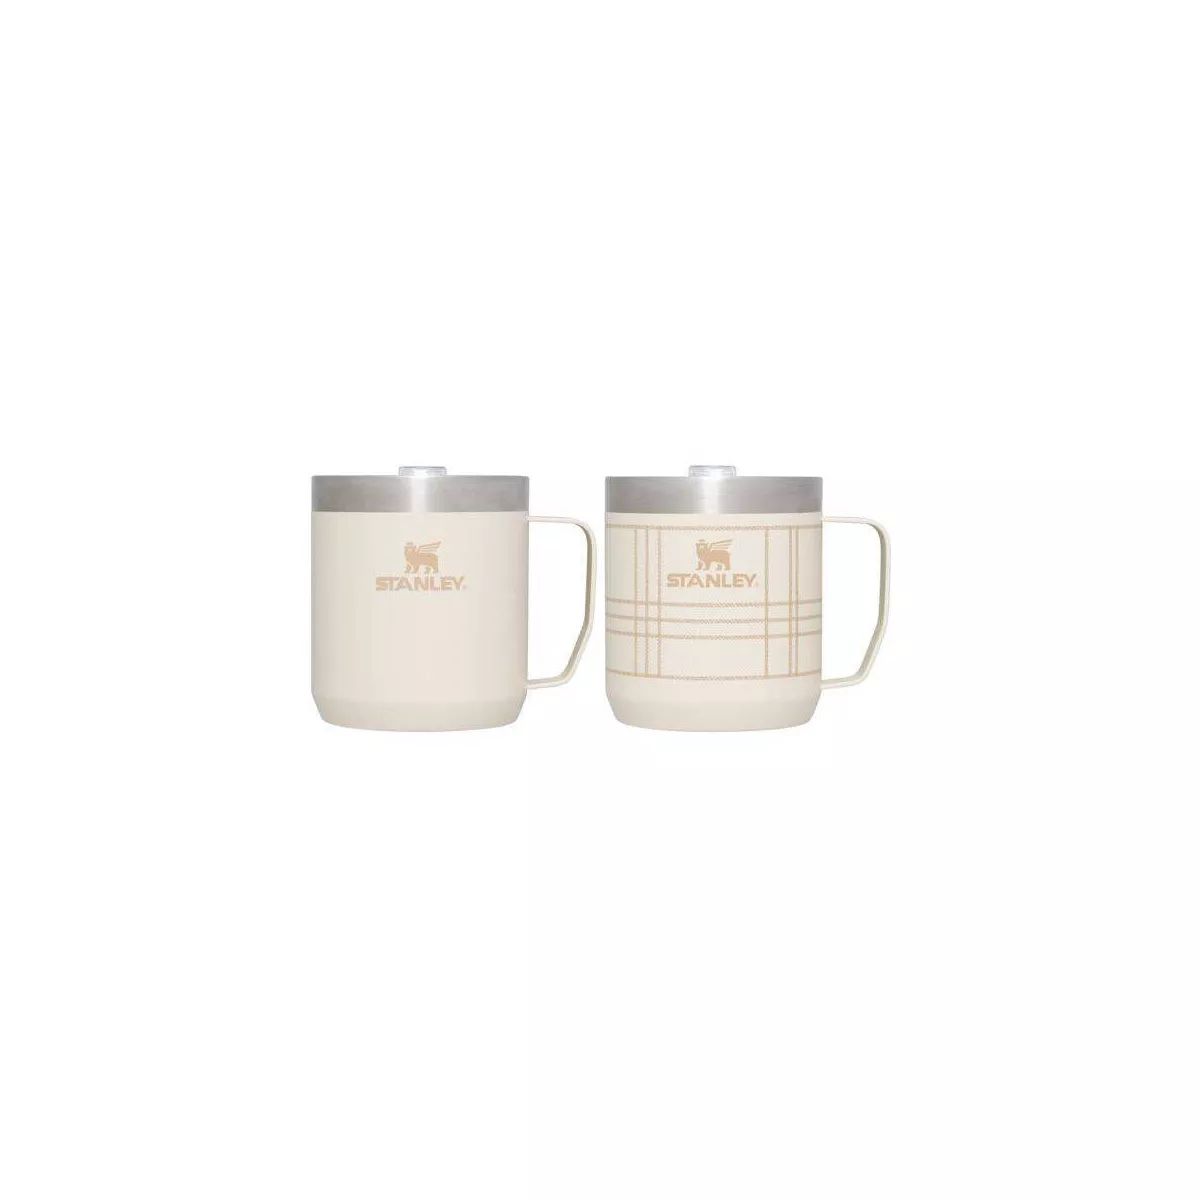 Stanley 2pk 12 oz Classic Legendary Stainless Steel Mugs - Hearth & Hand™ with Magnolia | Target